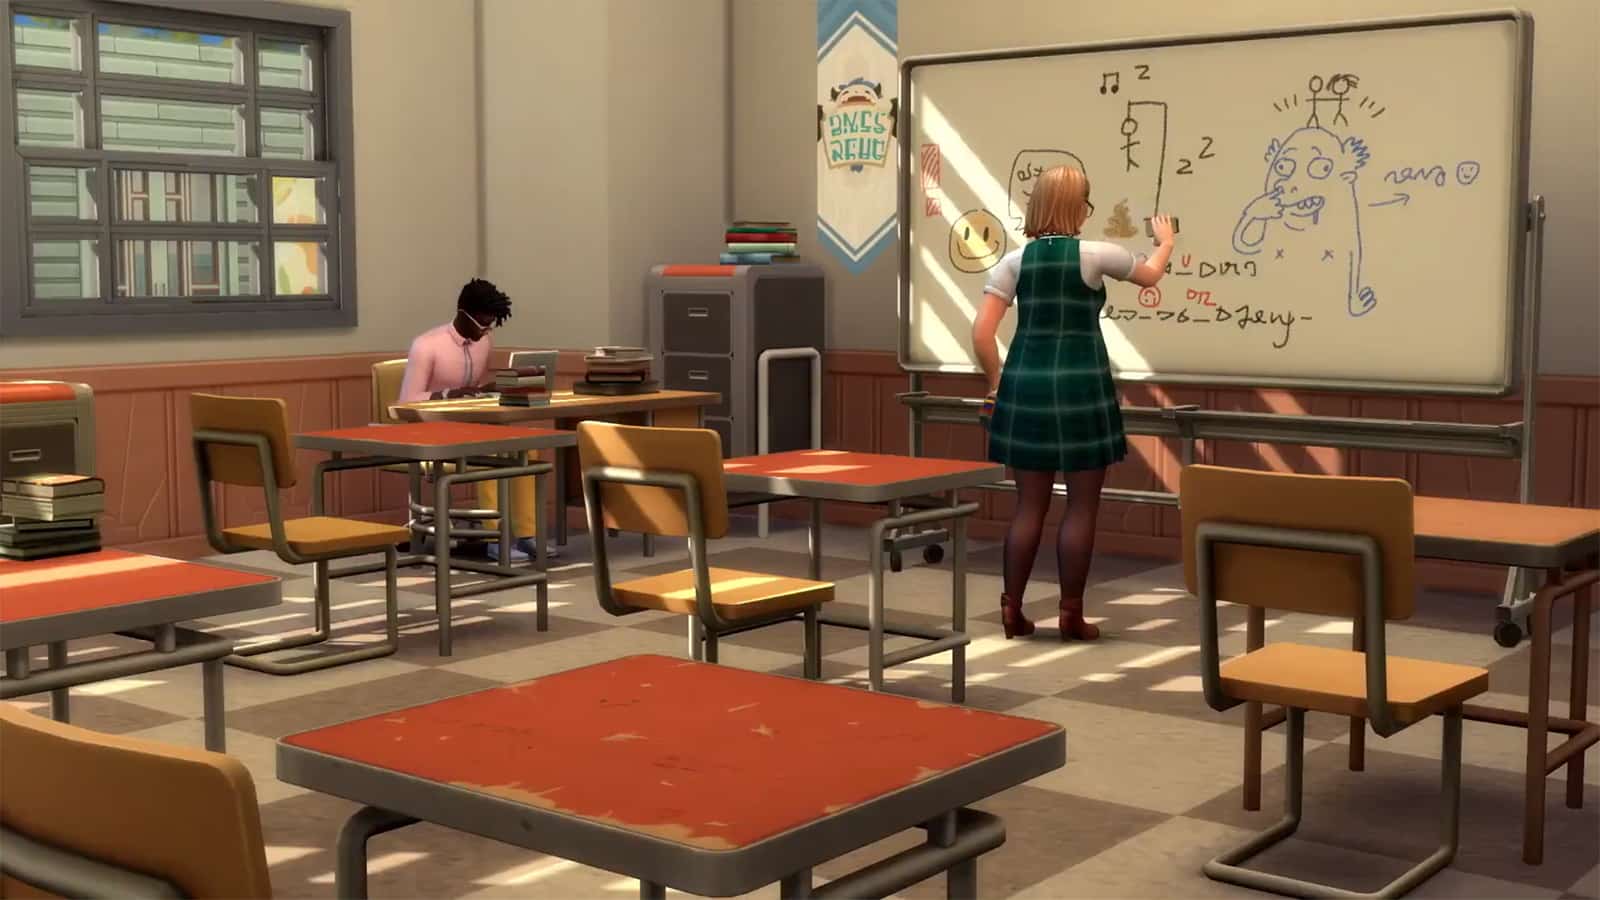 A classroom in The Sims